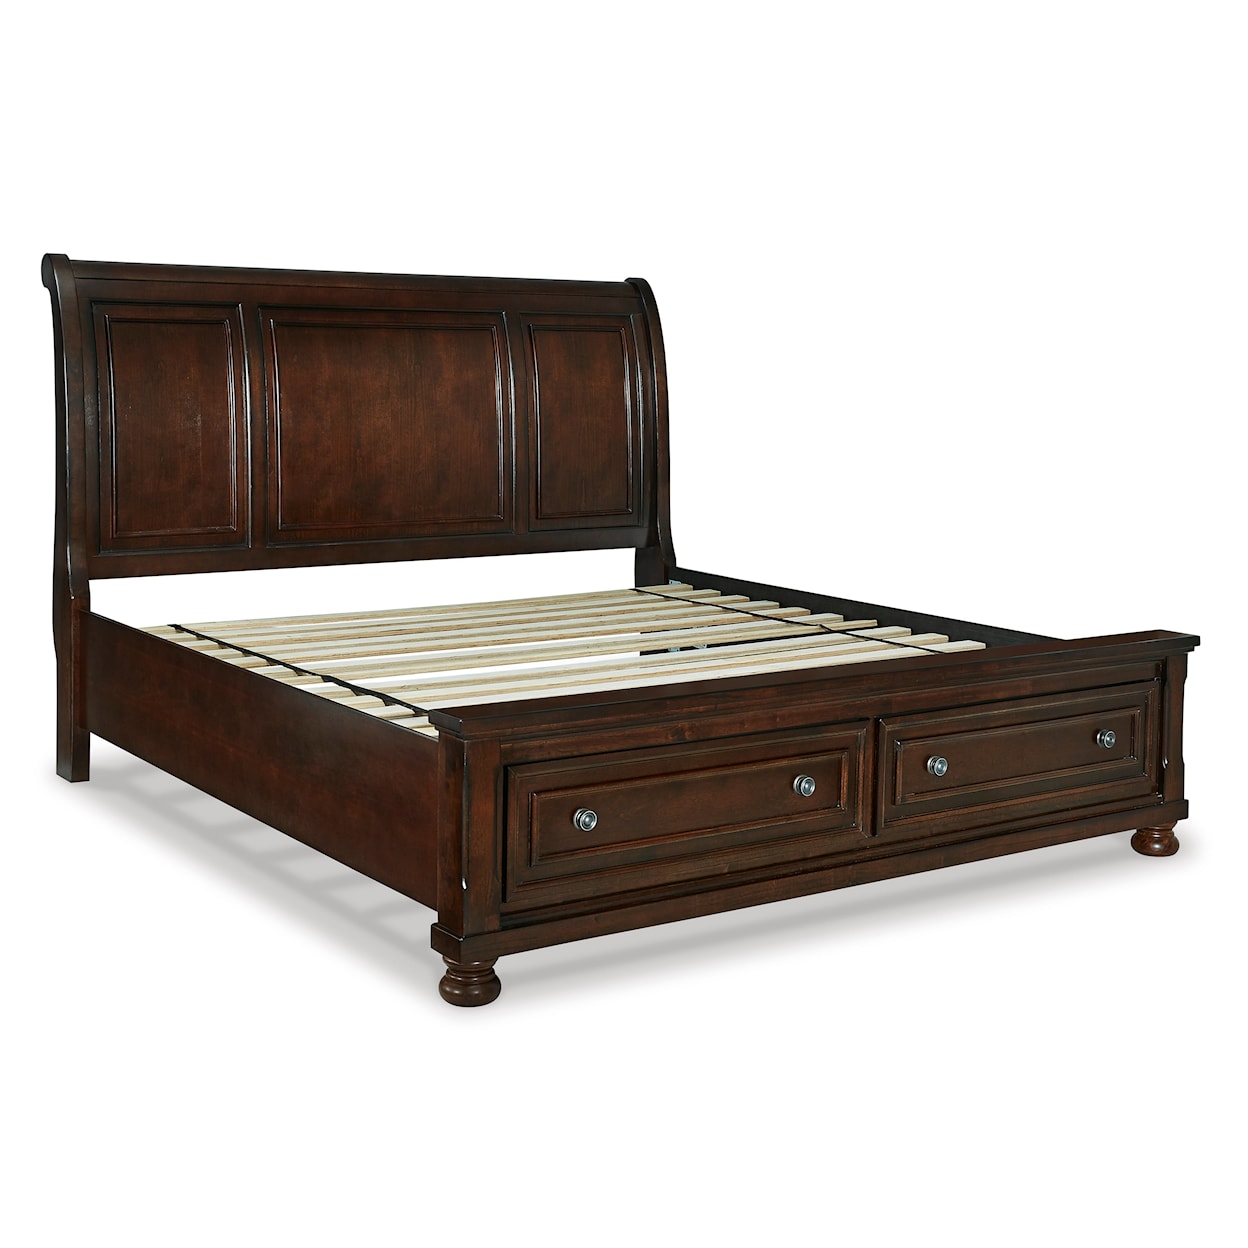 Signature Design by Ashley Furniture Porter King Sleigh Bed